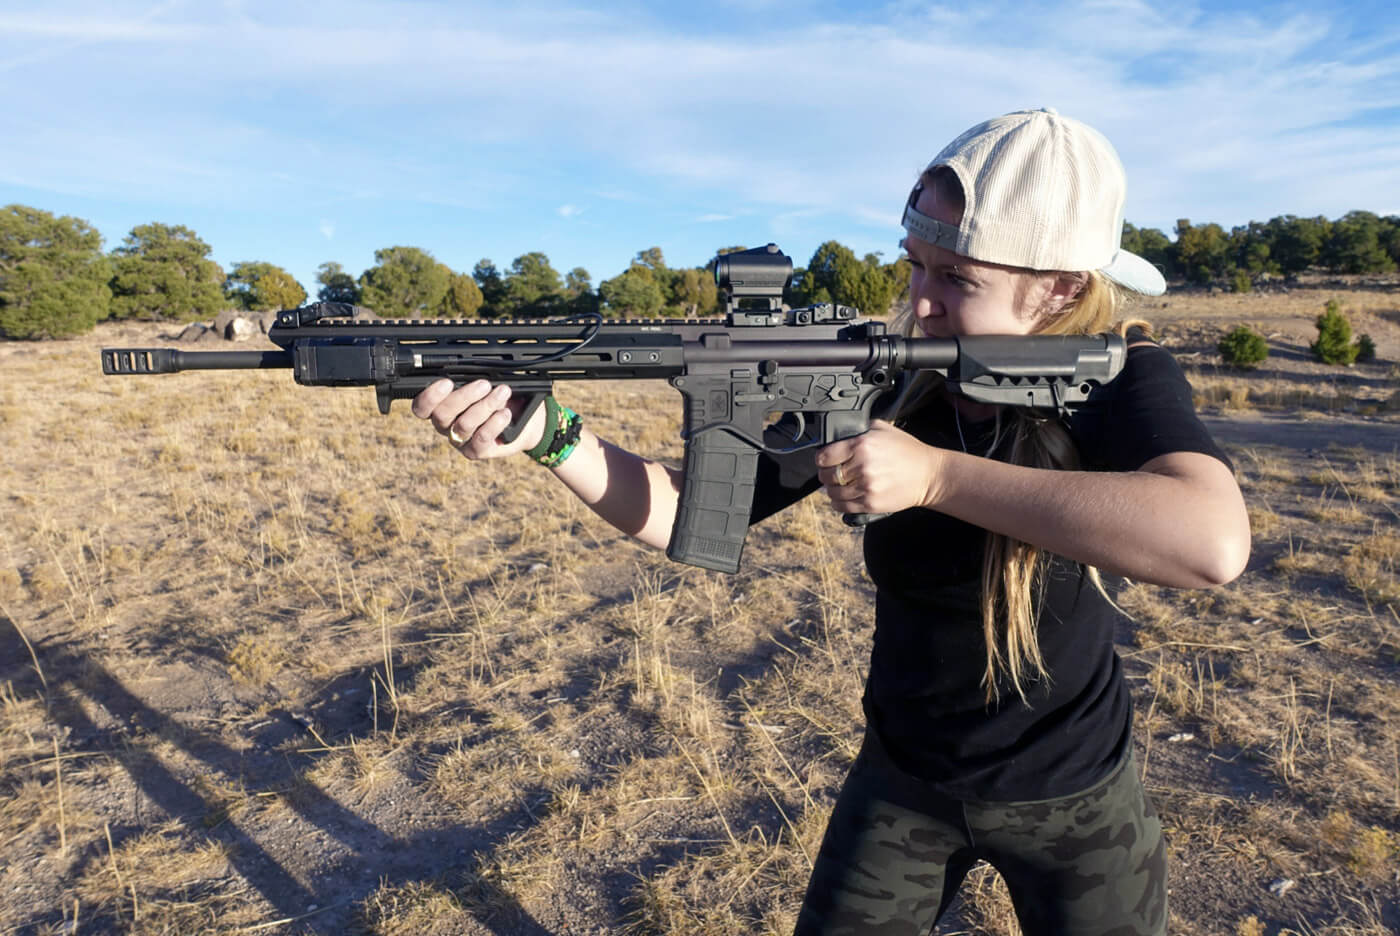 In this photograph, the author is on the shooting range with her AR-15 rifle chambered in 5.56x45mm NATO cartridge.